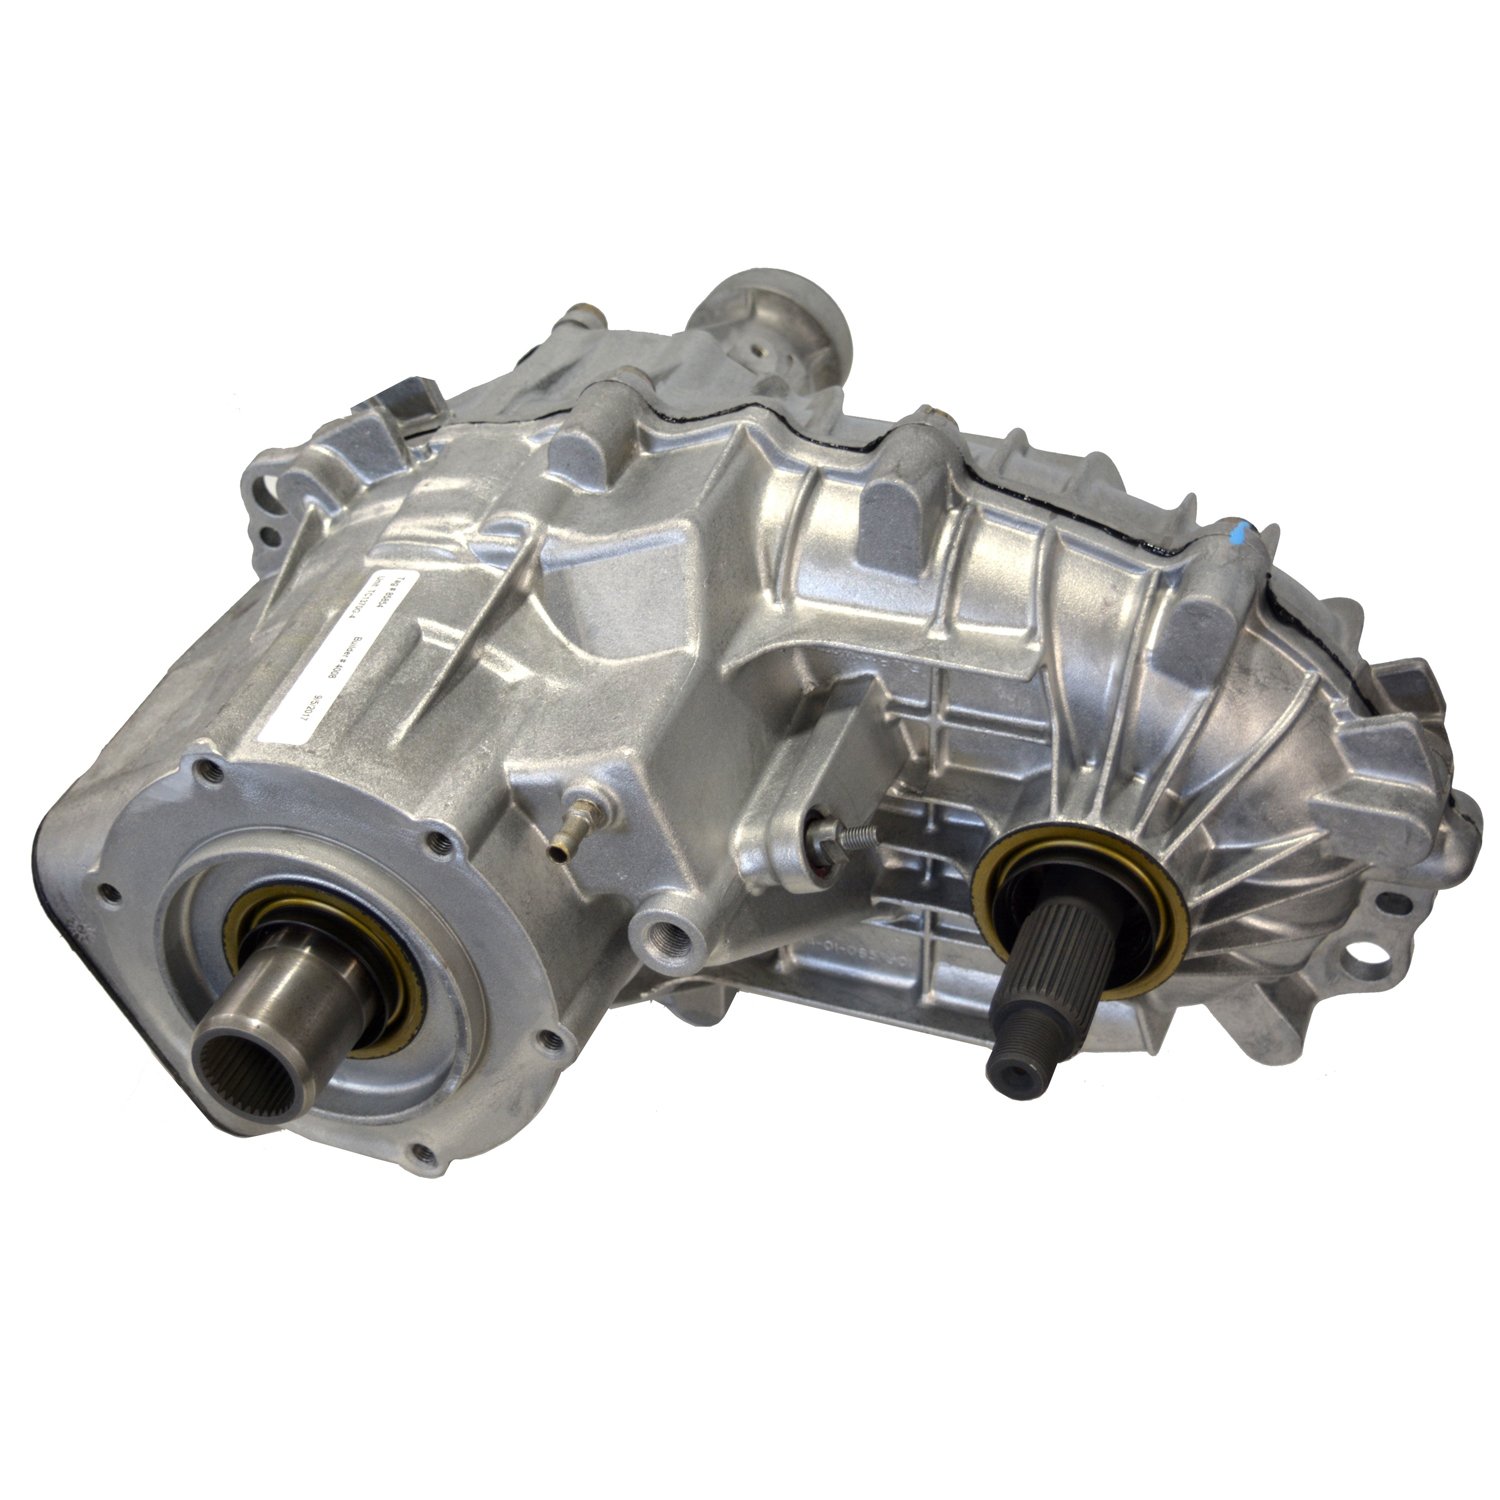 Remanufactured BW1370 & BW4401 Transfer Case for GM 1994 K3500